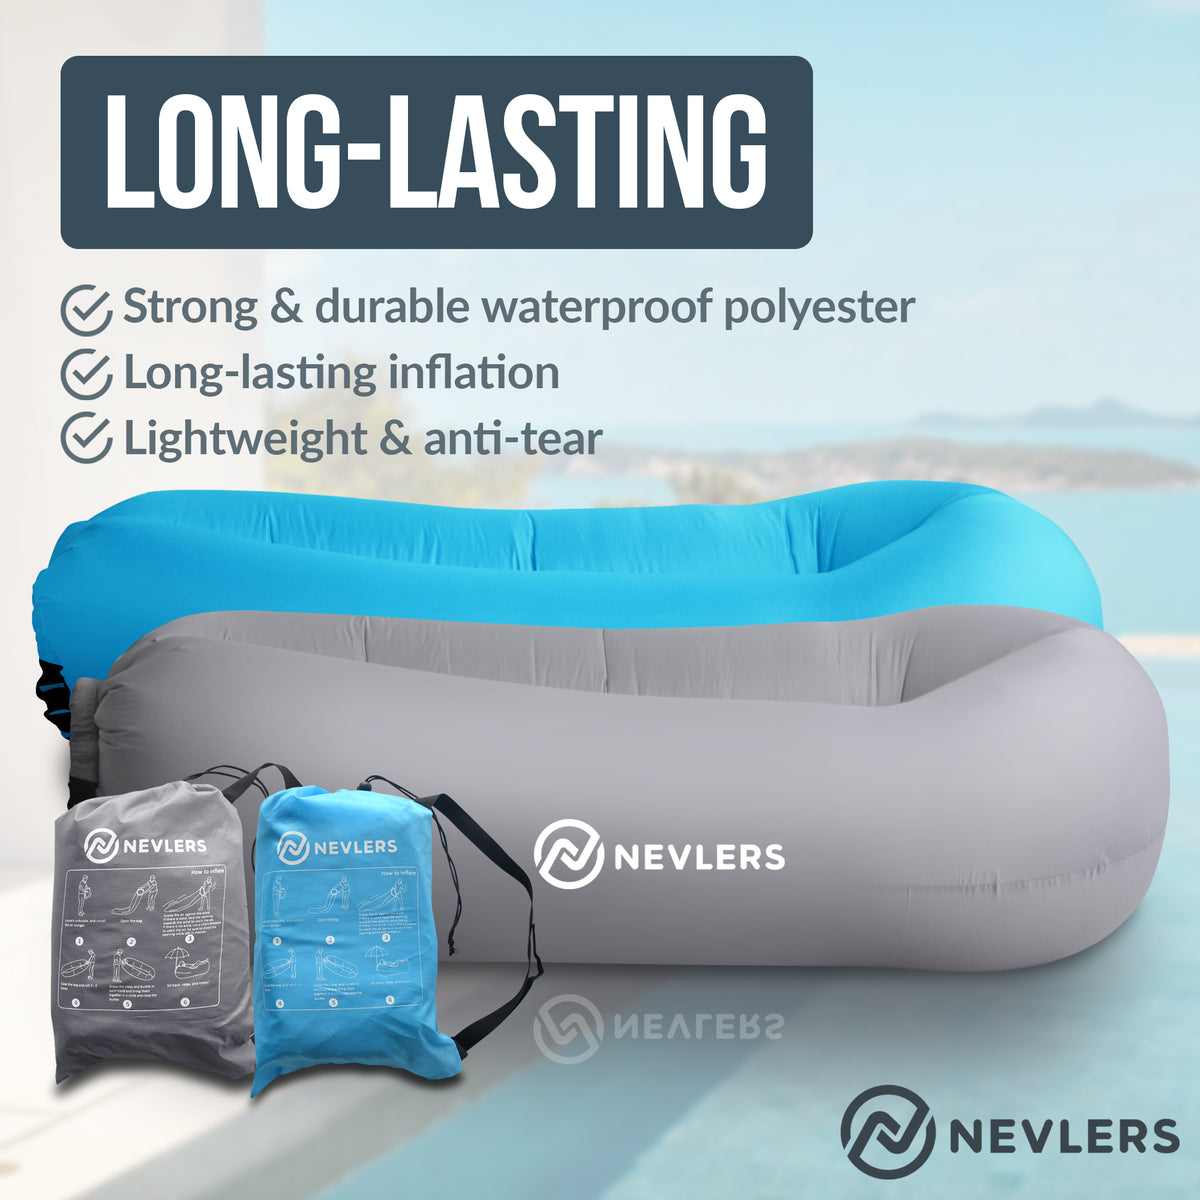 Inflatable Loungers - Blue/Gray - 2 Pack